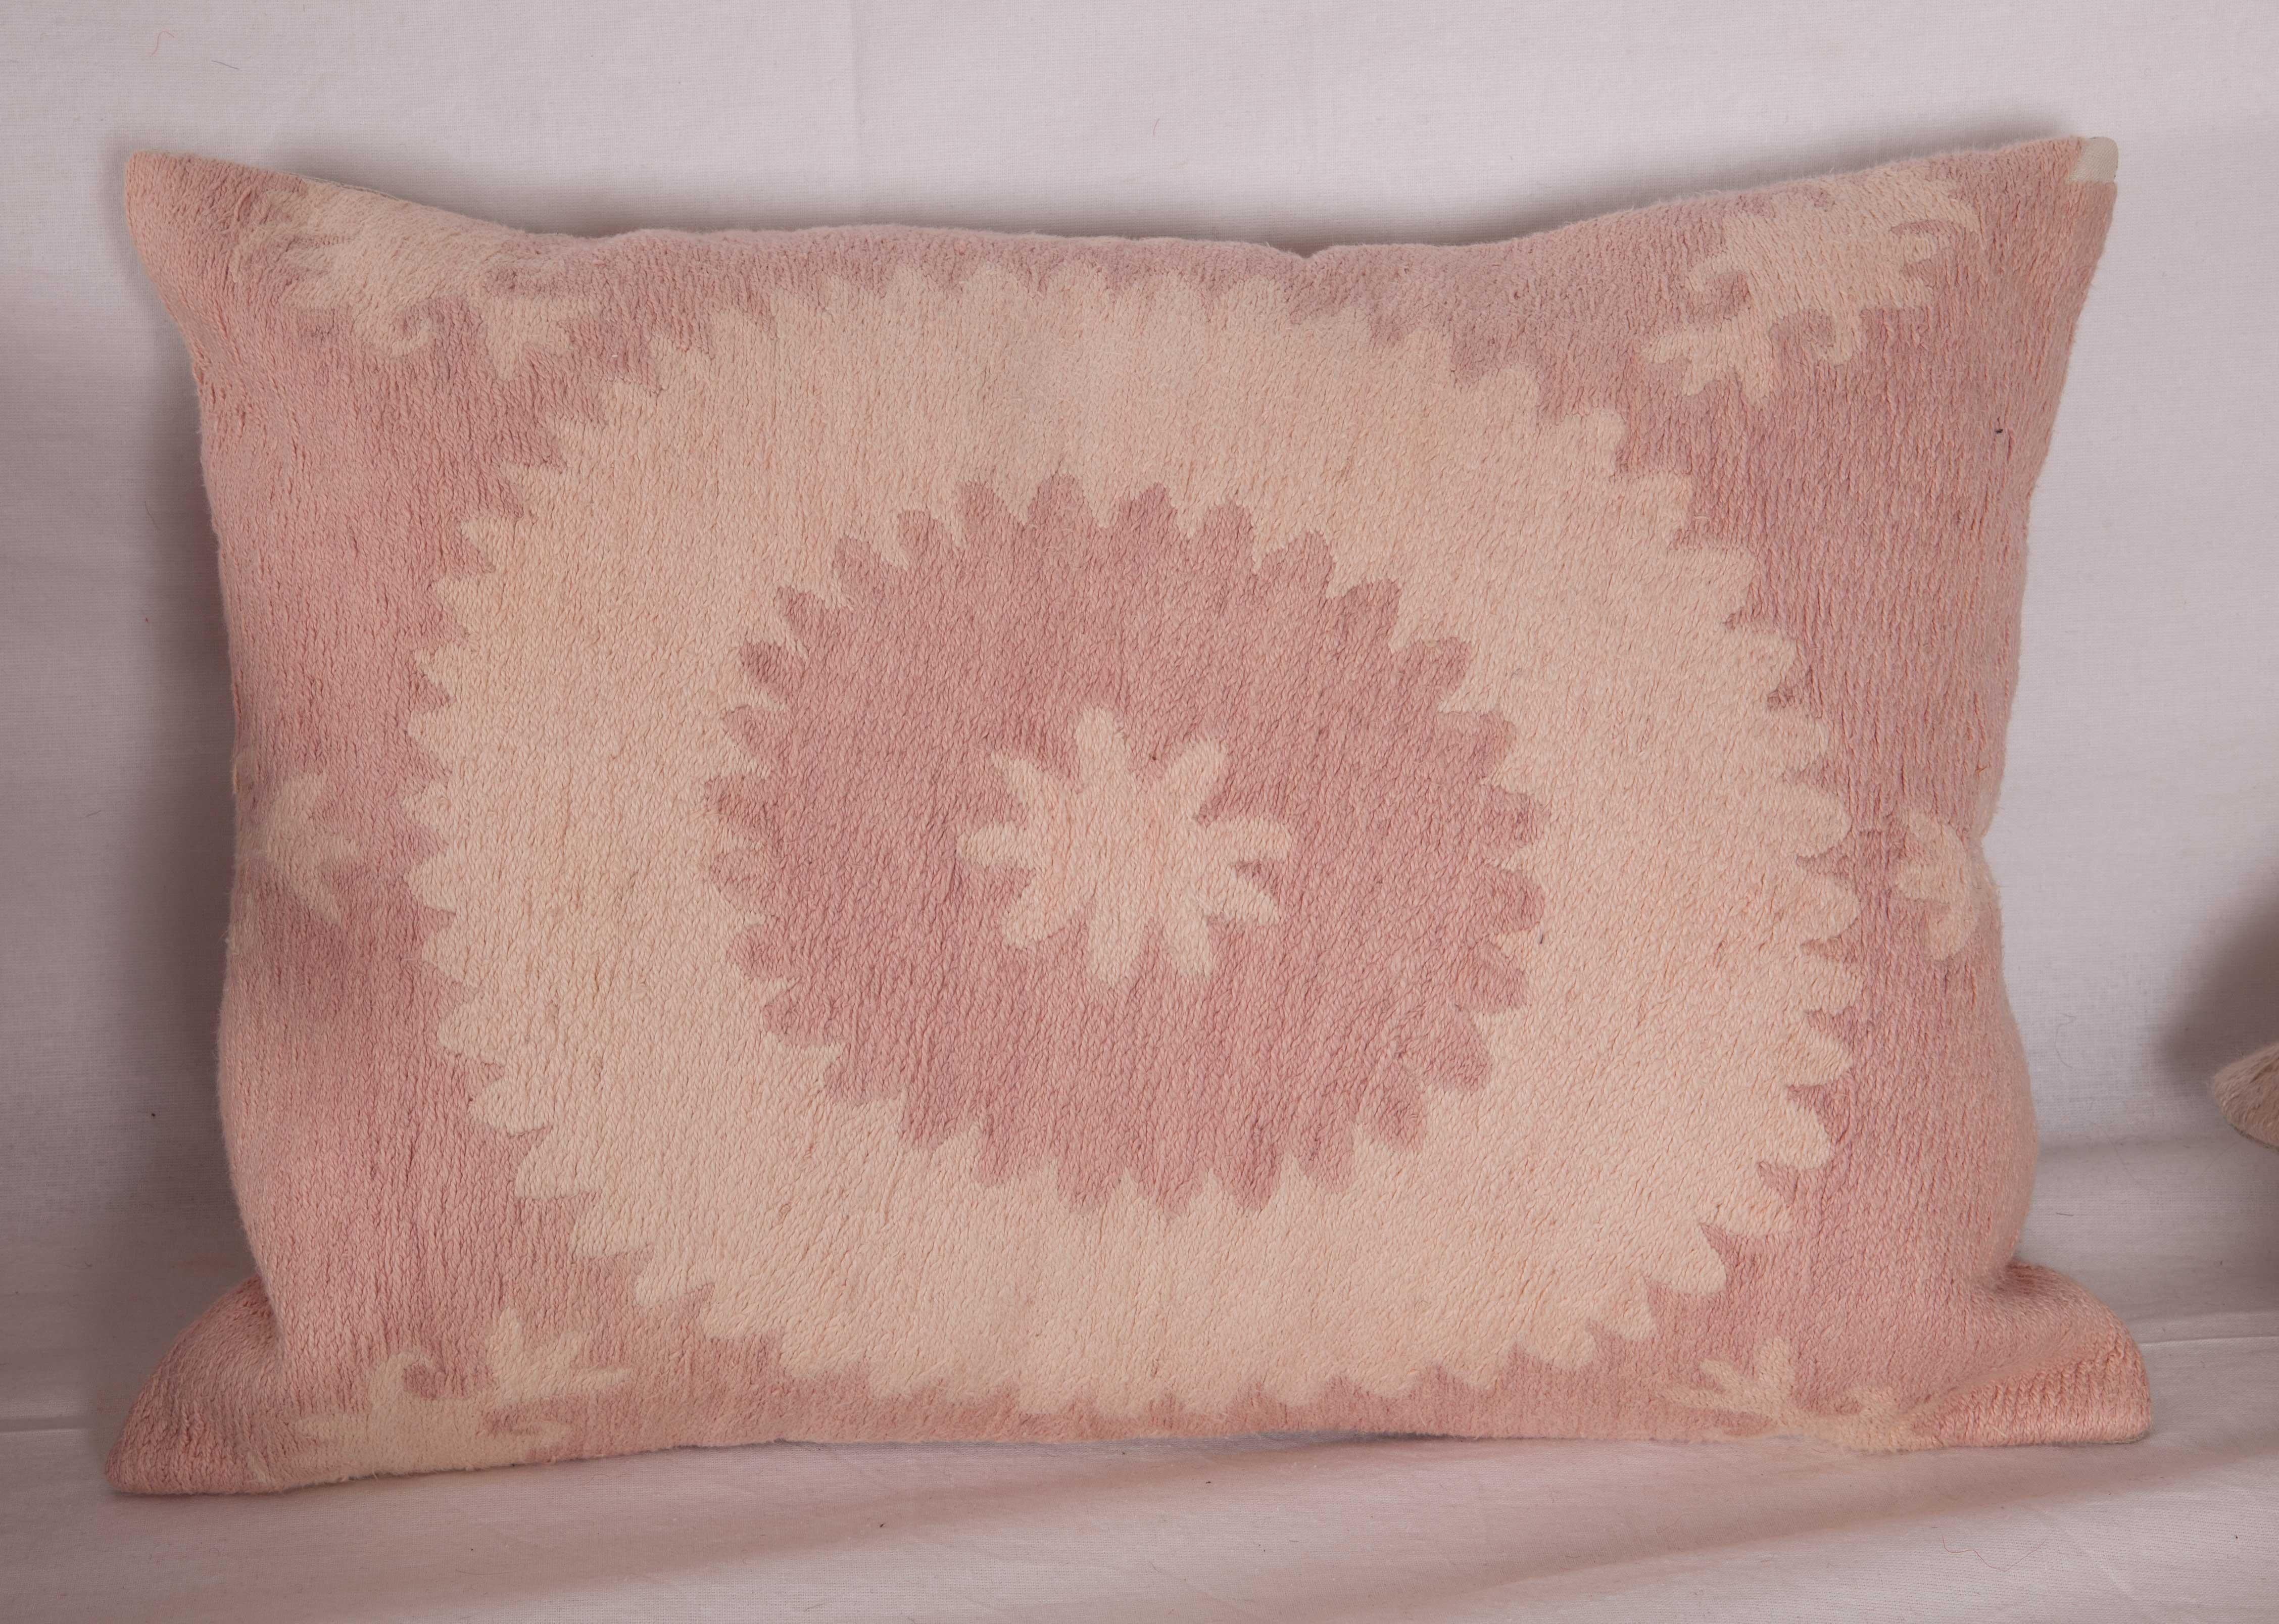 Embroidered Kidney Suzani Pillows Fashioned from a Mid-20th Century Suzani For Sale